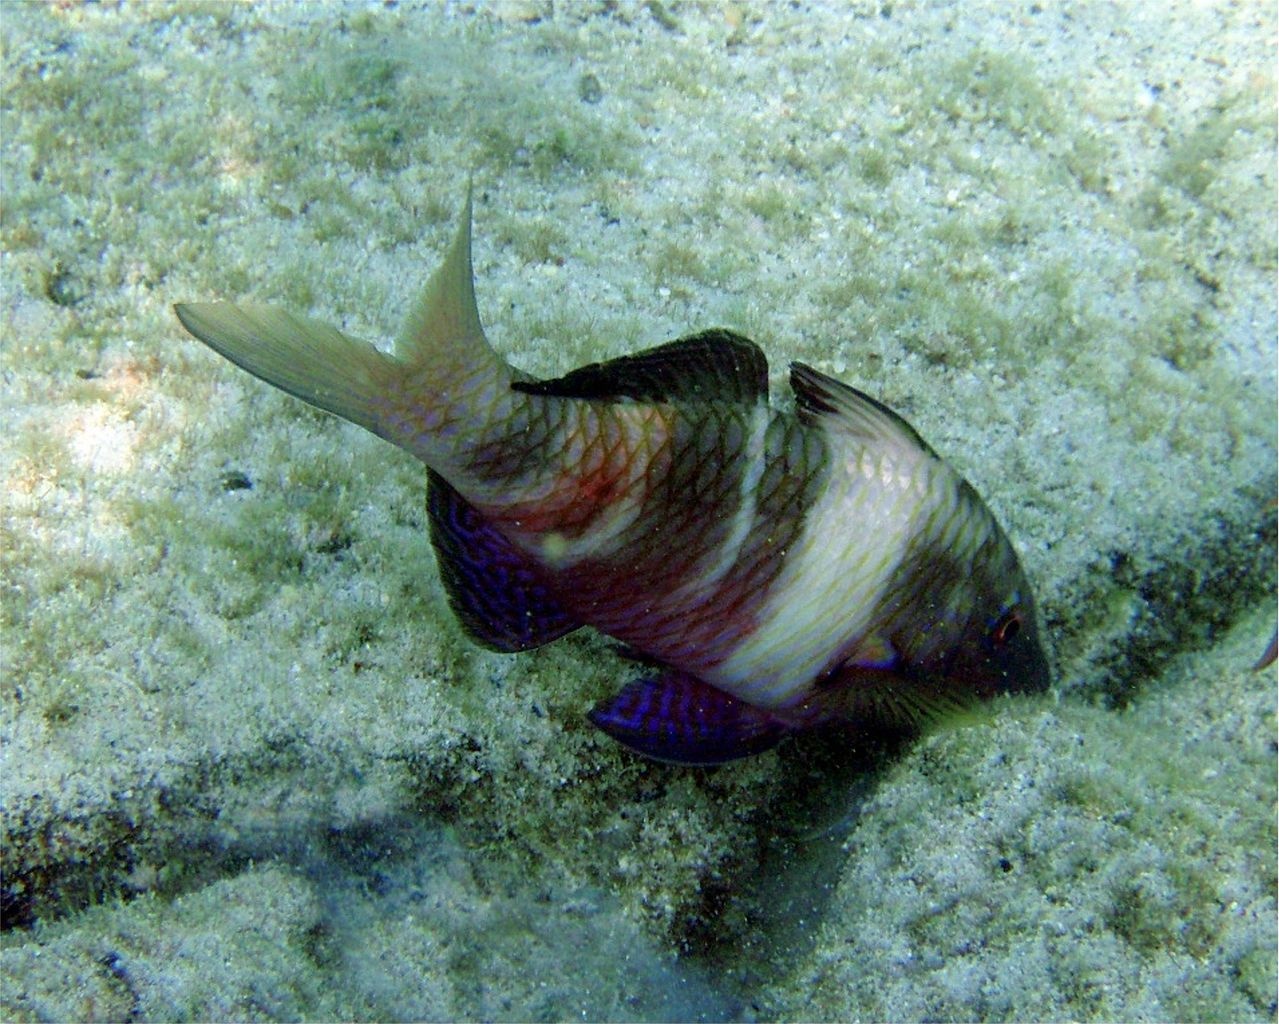 Poisson-chèvre insulaire - Parupeneus insularis - <a href='https://commons.wikimedia.org/wiki/File:Parupeneus_insularis.jpg' title='via Wikimedia Commons'>Brocken Inaglory</a> / <a href='https://creativecommons.org/licenses/by-sa/3.0'>CC BY-SA</a> - BioObs